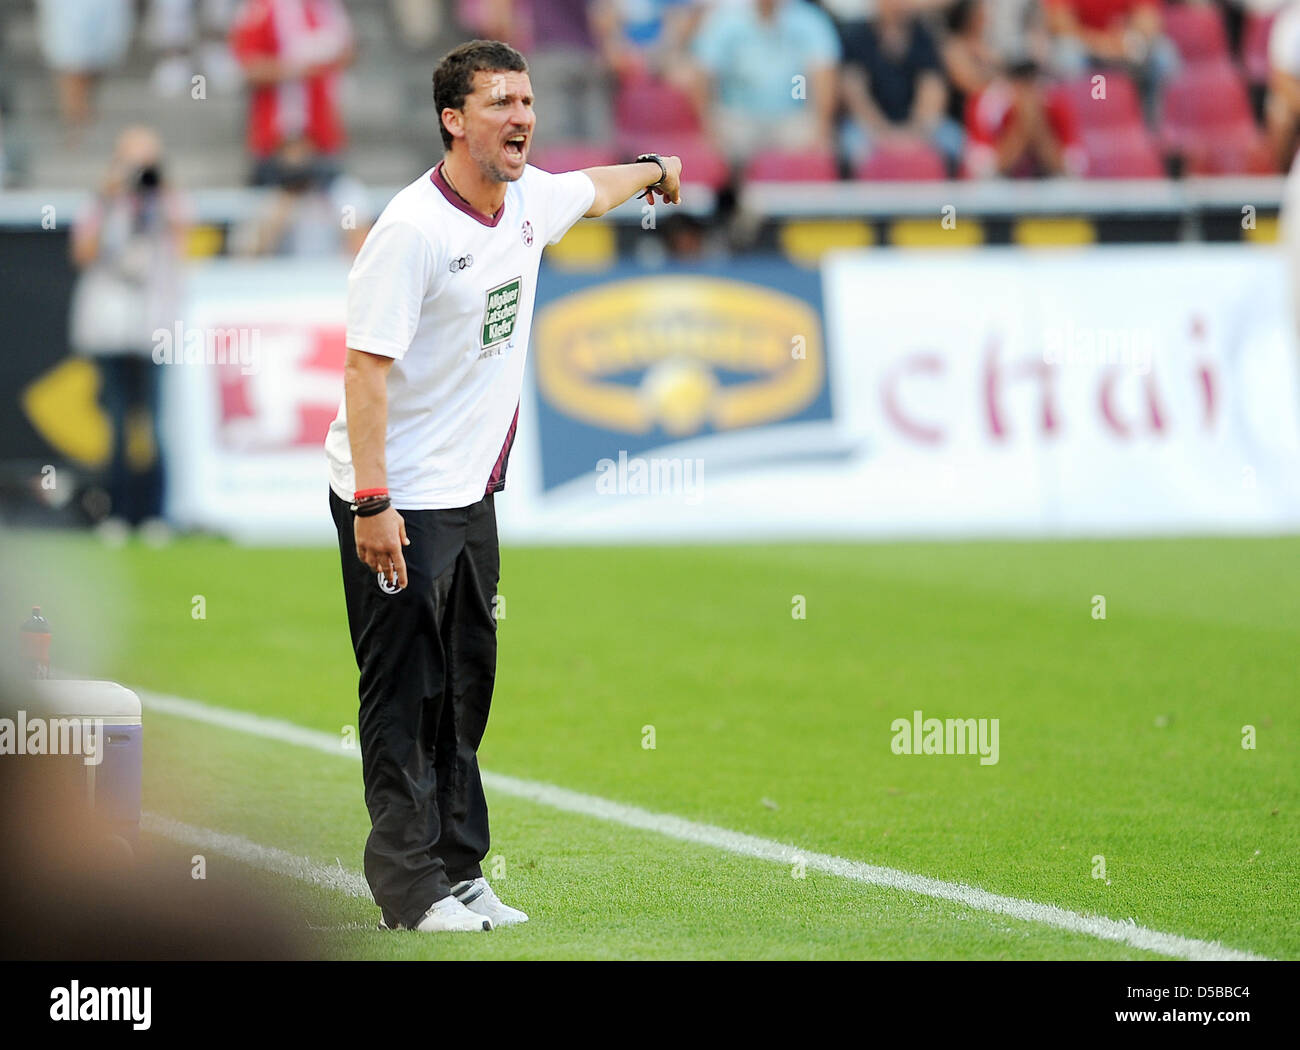 Kaiserslautern's head coach Marco Kurz gestures from the sideline during German Bundesliga match 1.FC Cologne vs 1.FC Kaiserslautern at RheinEnergie stadium in Cologne, Germany, 21 August 2010. Kaiserslautern defeated Cologne with 3-1. Photo: ACHIM SCHEIDEMANN  (ATTENTION: EMBARGO CONDITIONS! The DFL permits the further utilisation of the pictures in IPTV, mobile services and other Stock Photo